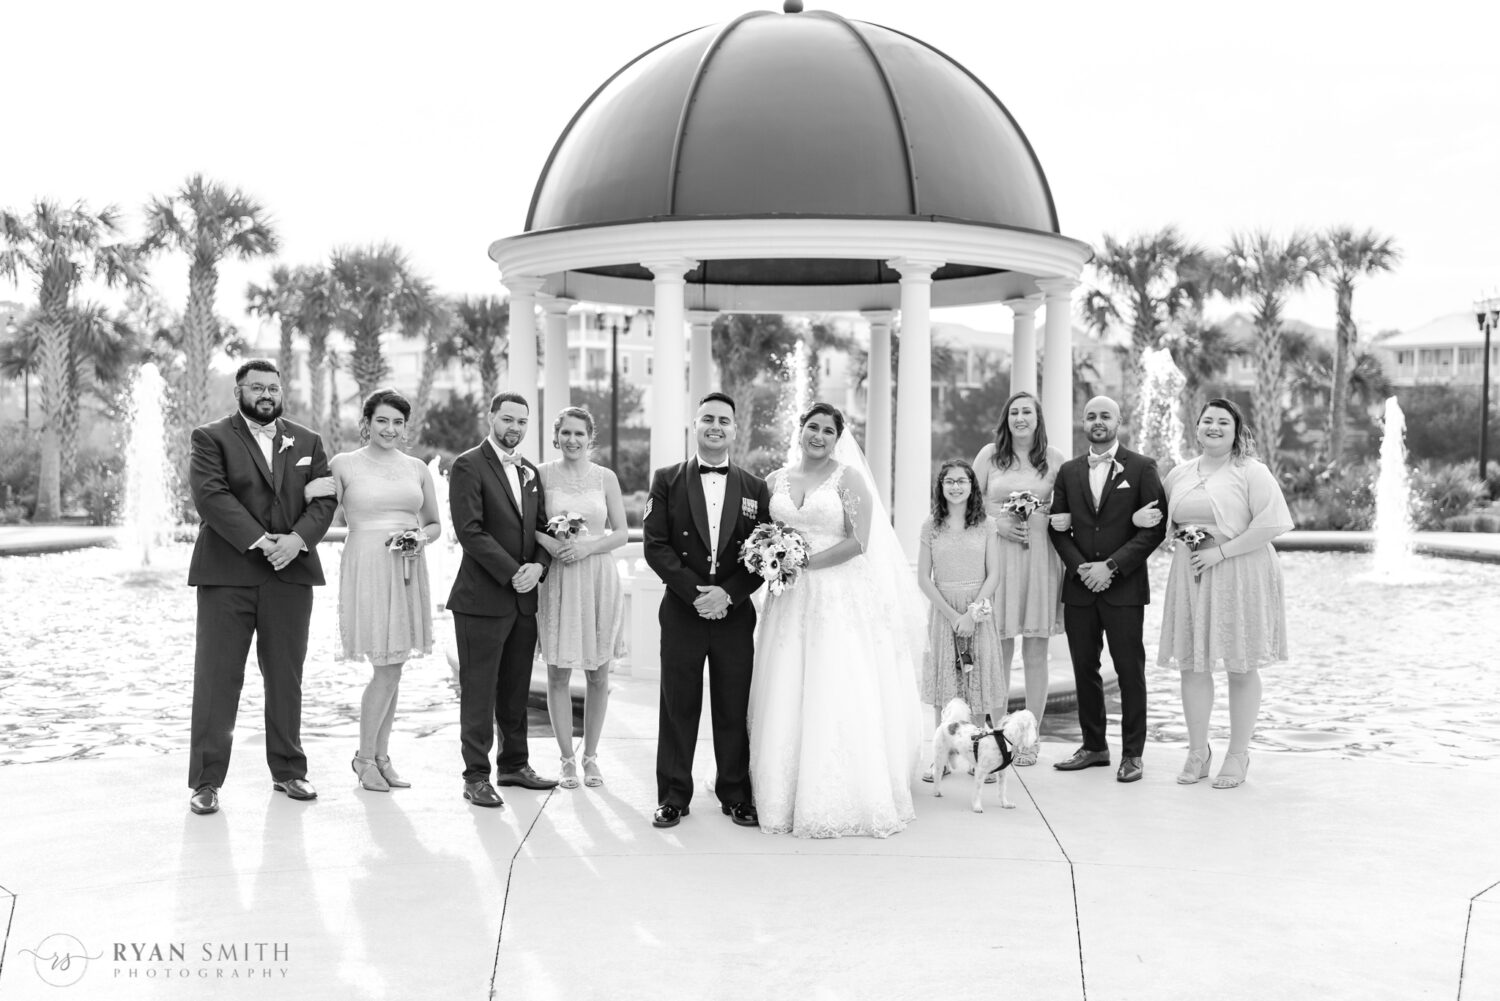 Black and white of bridal party in front of the gazebo  - 21 Main Events at North Beach